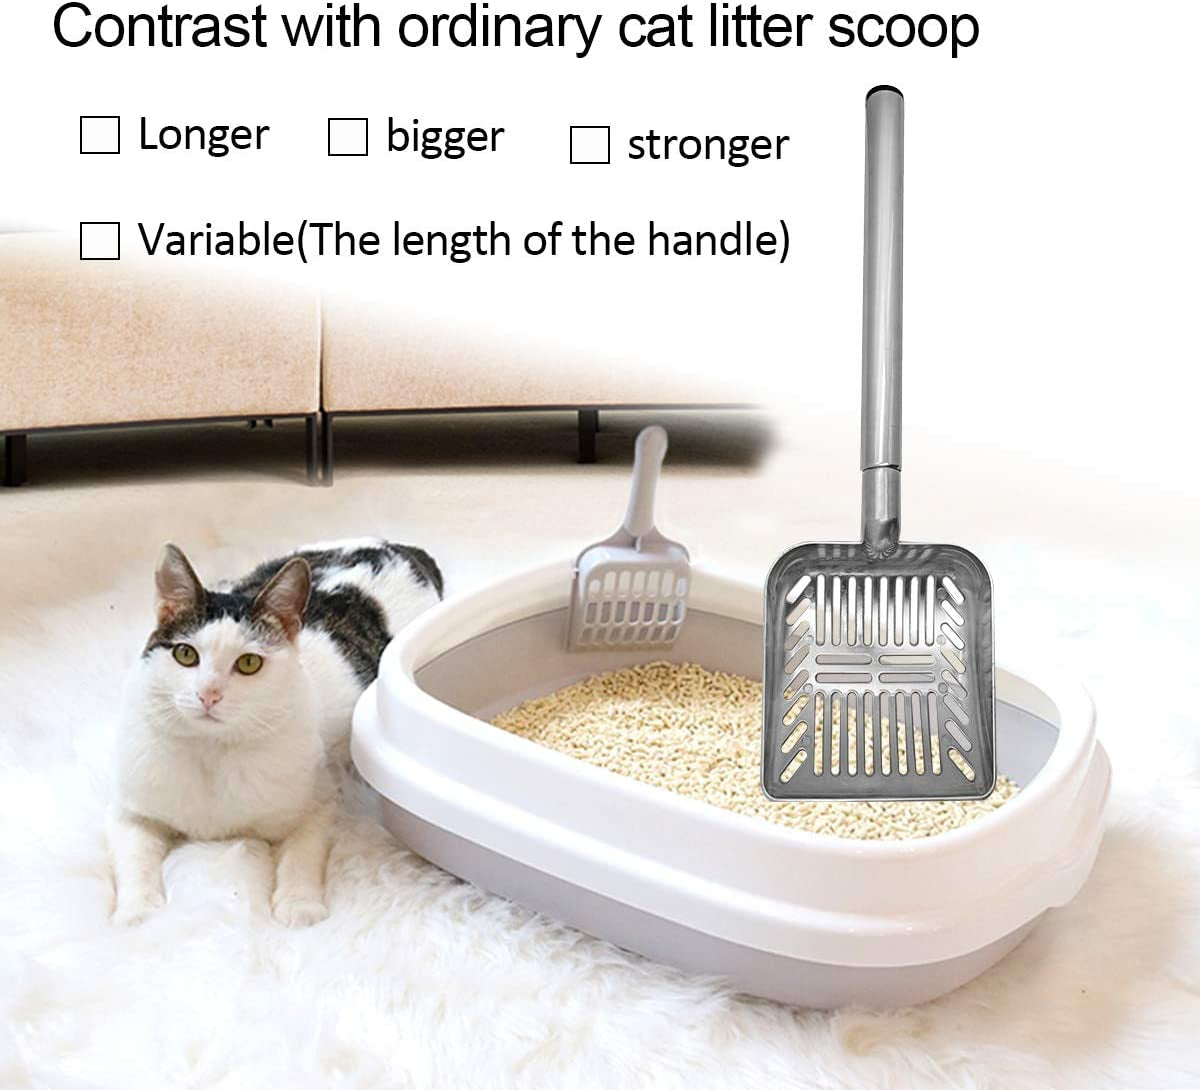 Stainless Steel Cat Litter Scoop 23 Inches Telescoping Litter Scoop with Long Handle Perfect Scooper for Cats and Dogs